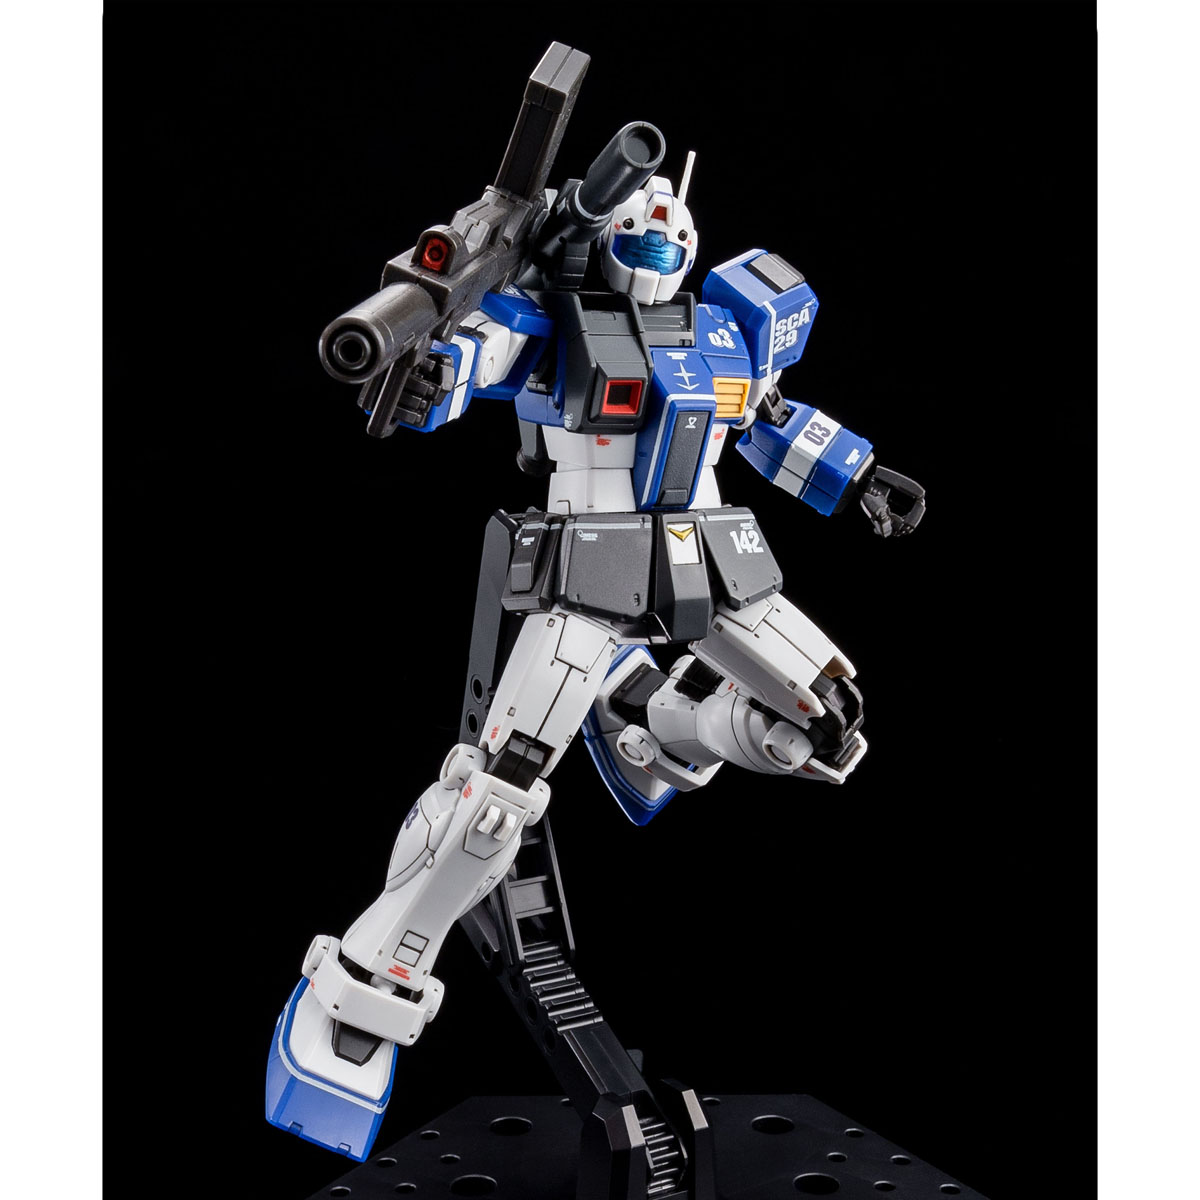 HG 1/144 GM CANNON (with ROCKET BAZOOKA)[Jan 2021 Delivery]